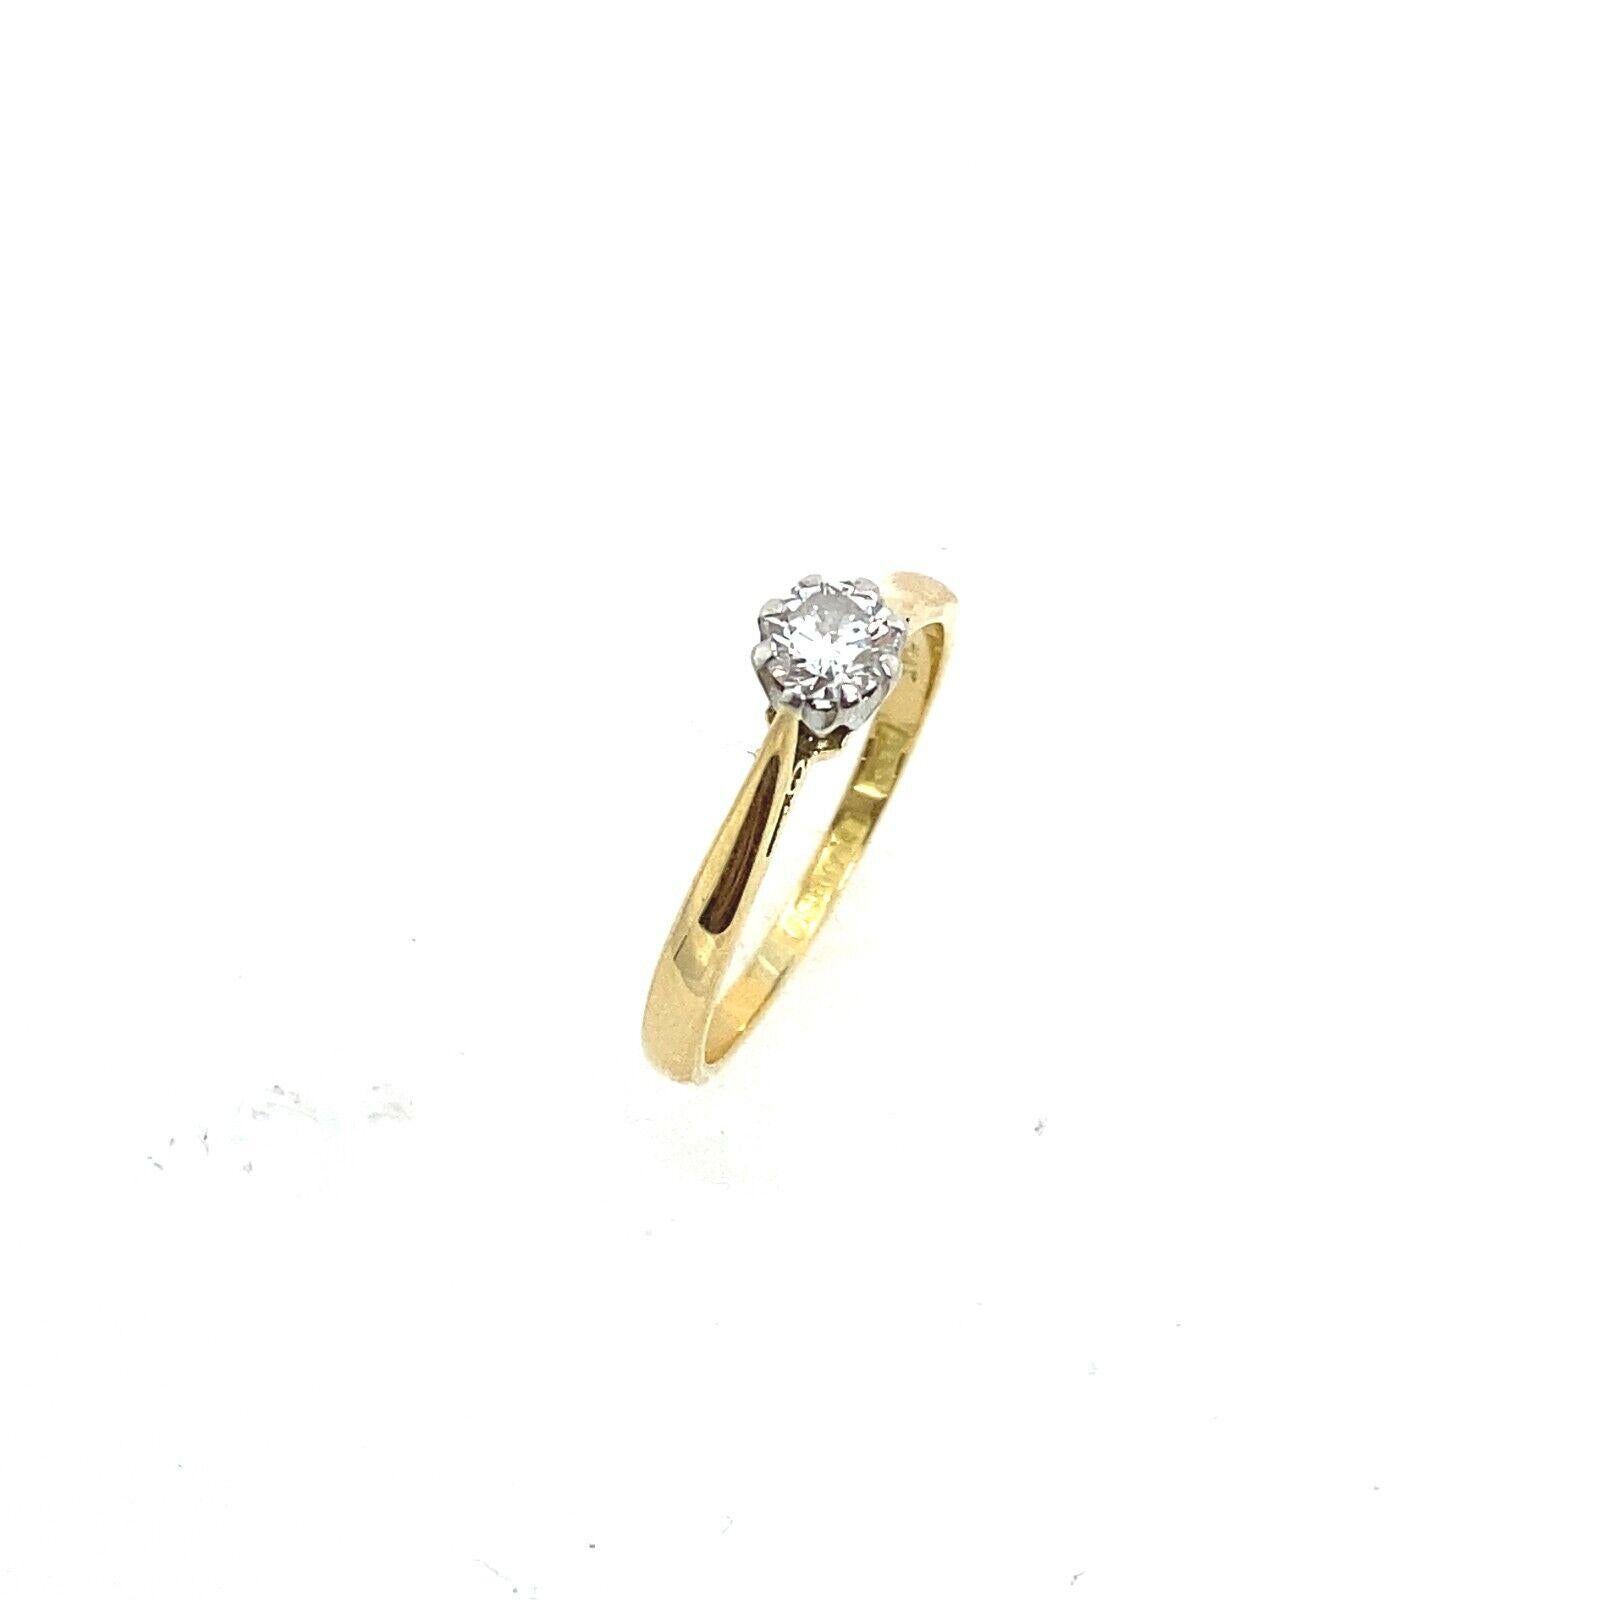 This diamond solitaire ring features a 0.25ct G-H/SI1 clarity round brilliant cut diamond on a 18ct yellow gold and platinum setting. The unique design of this ring offers a timeless piece of jewellery.

Additional Information:
Total Diamond Weight: